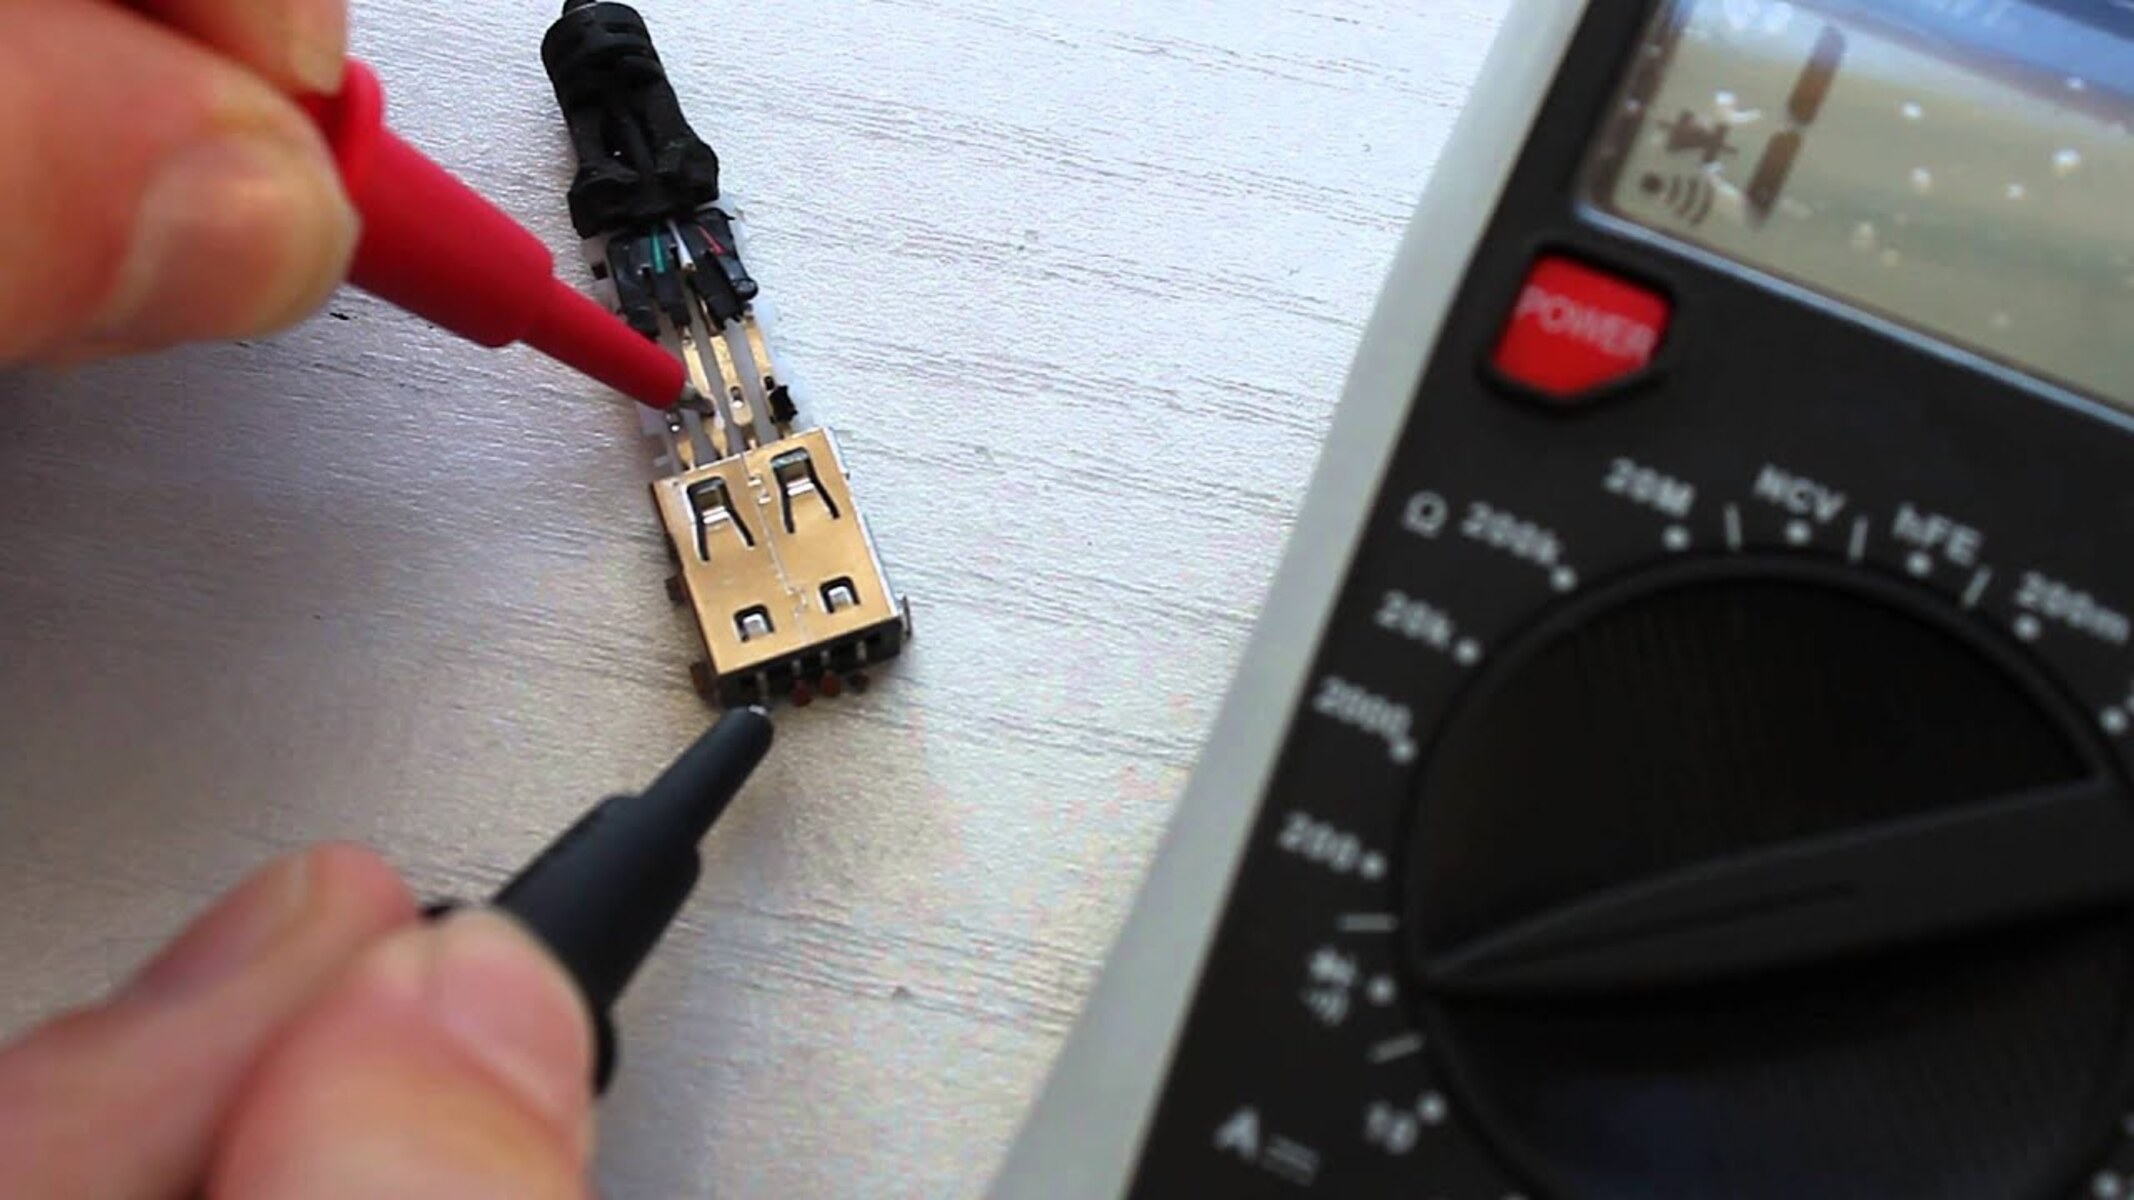 Ensuring Performance: A Step-by-Step Guide To Testing USB Chargers With A Multimeter